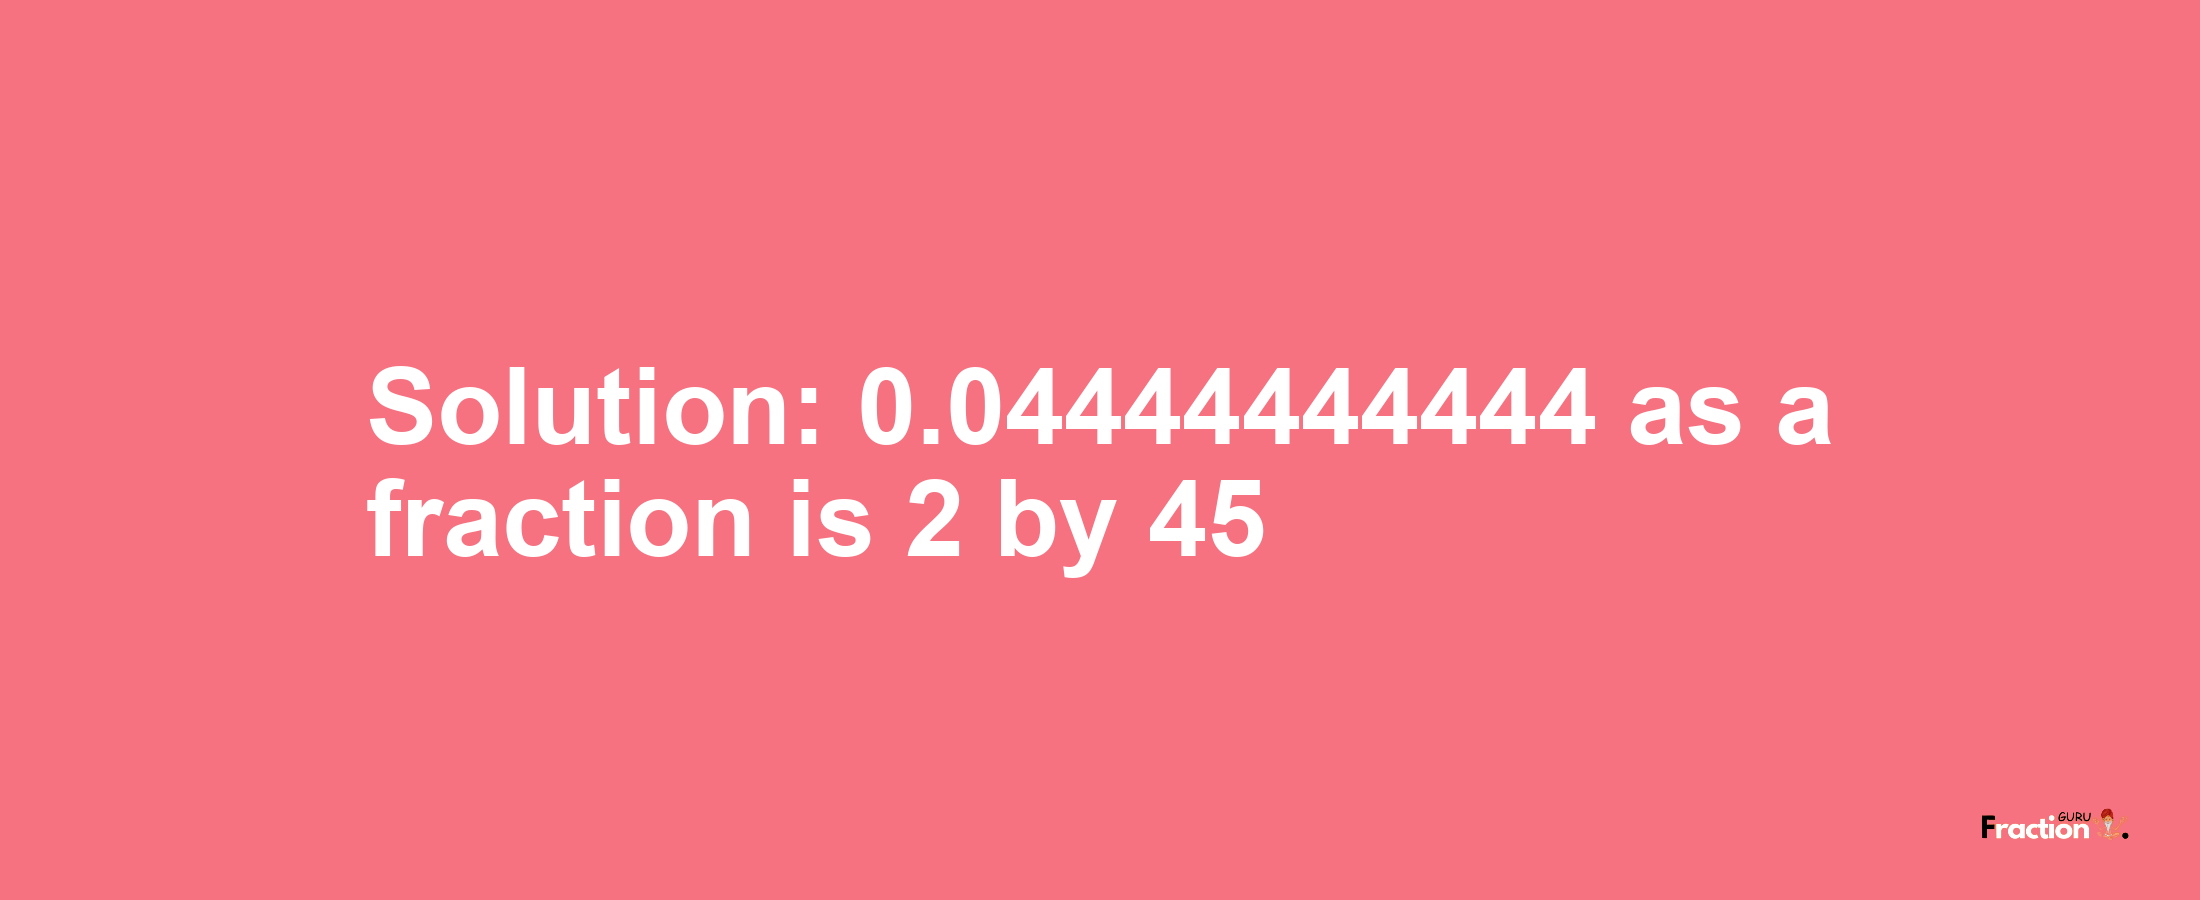 Solution:0.04444444444 as a fraction is 2/45